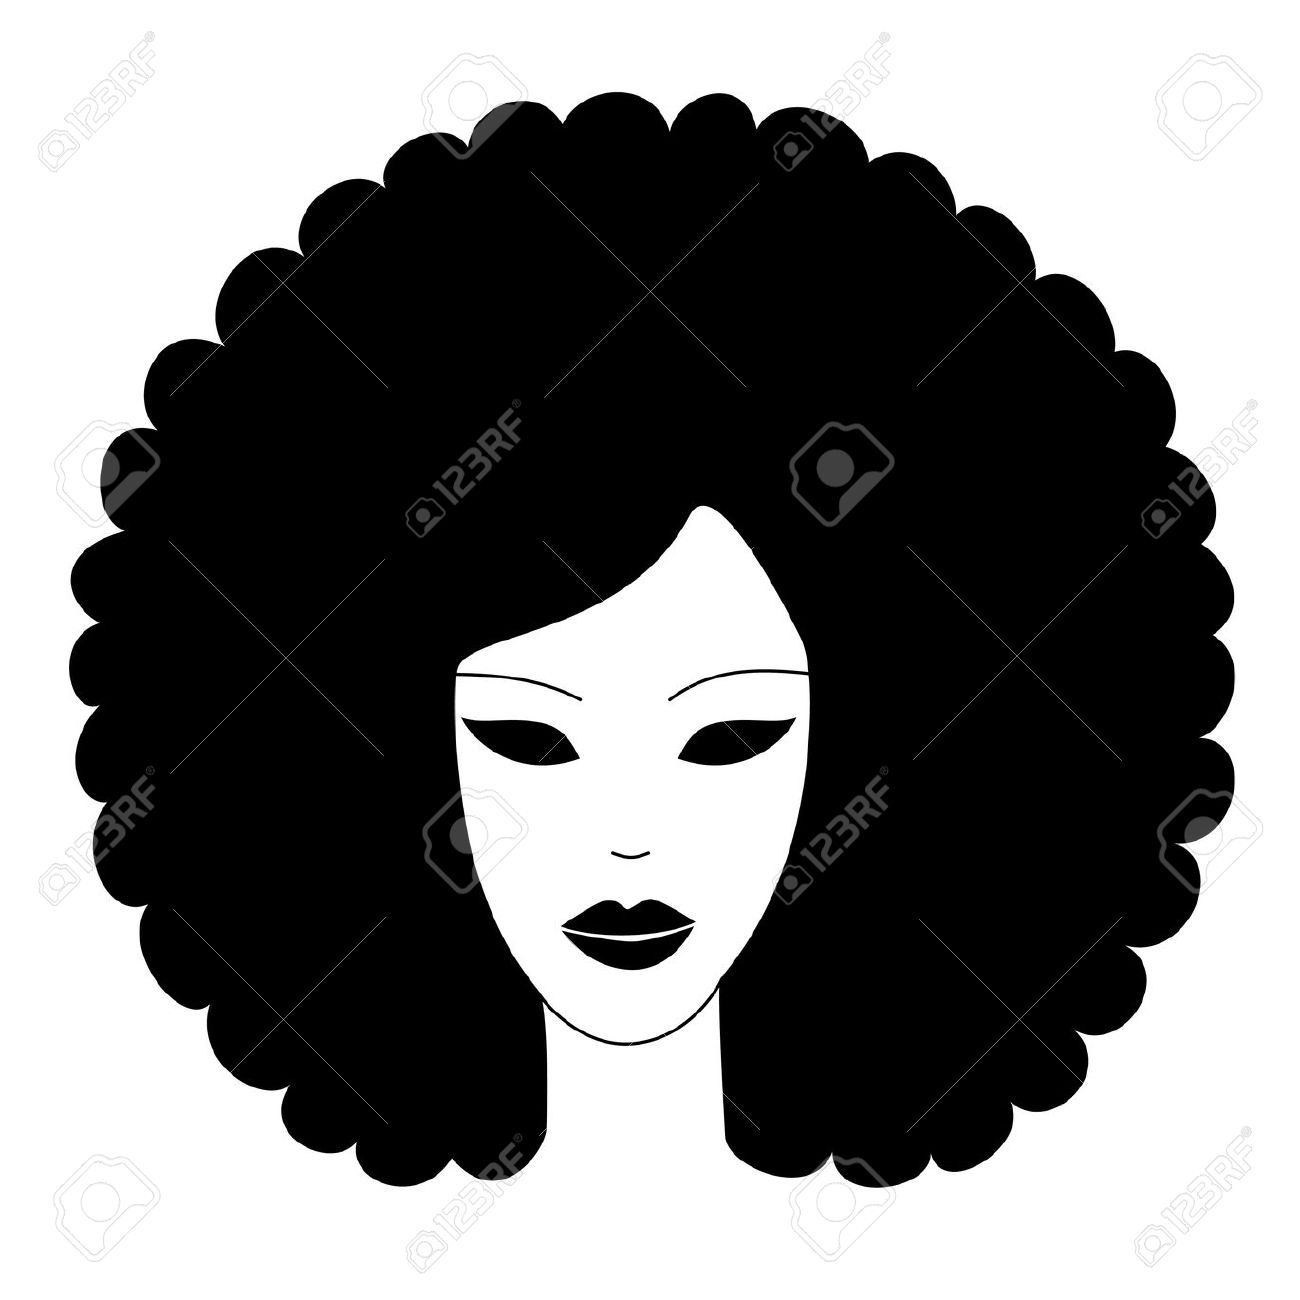 afro clipart silhouette